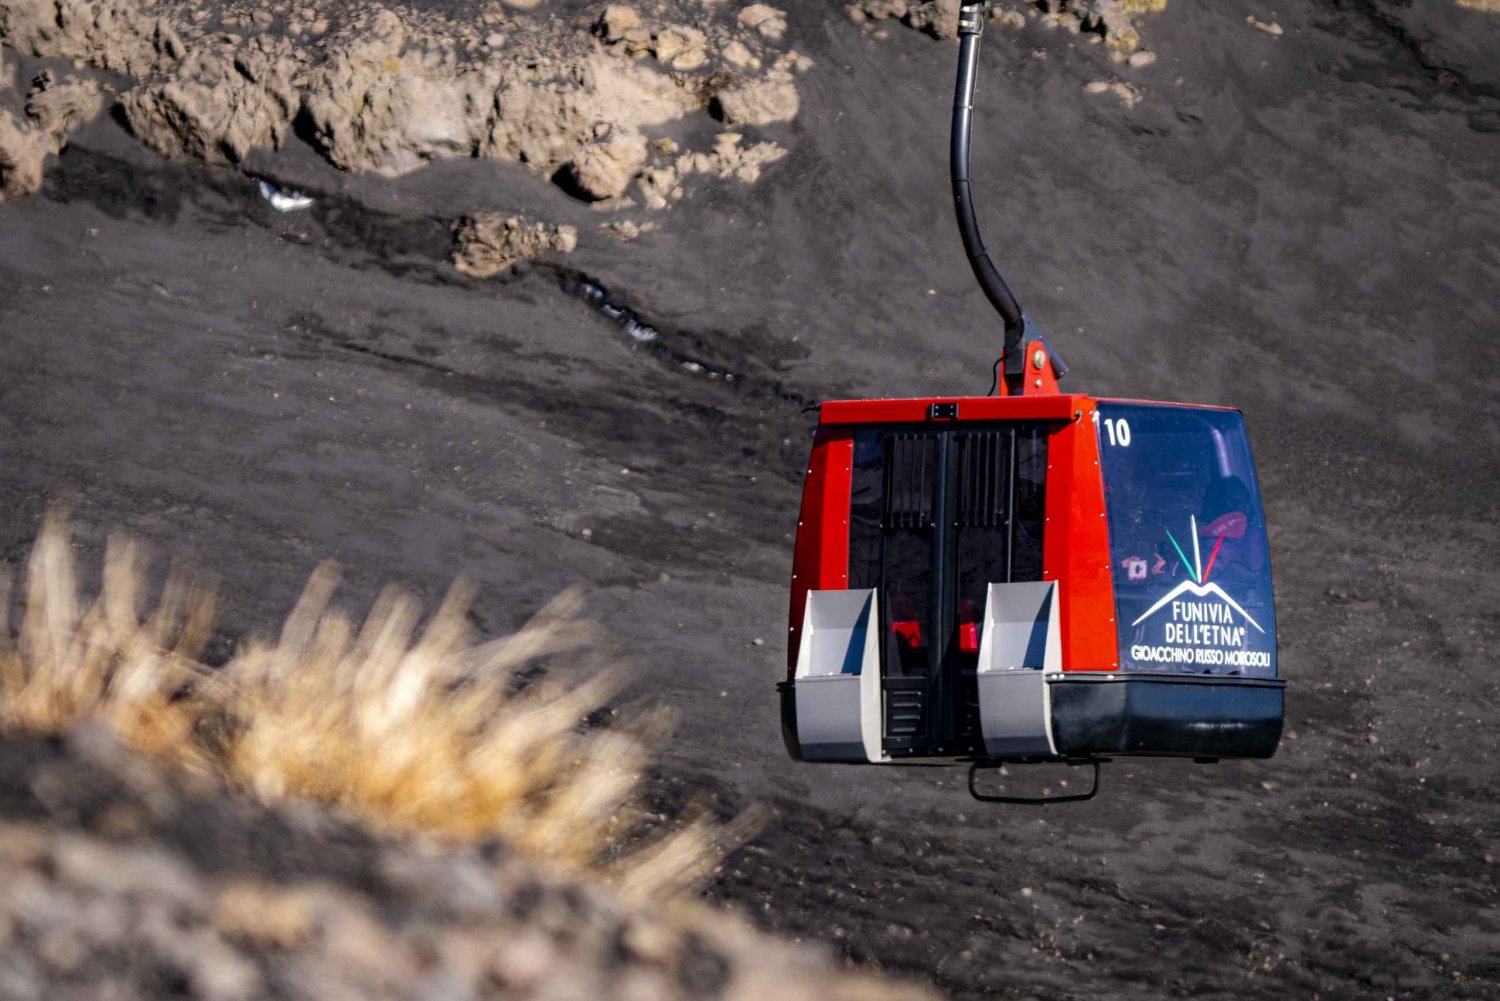 Mount Etna: Roundtrip Cable Car and 4x4 Bus Ticket